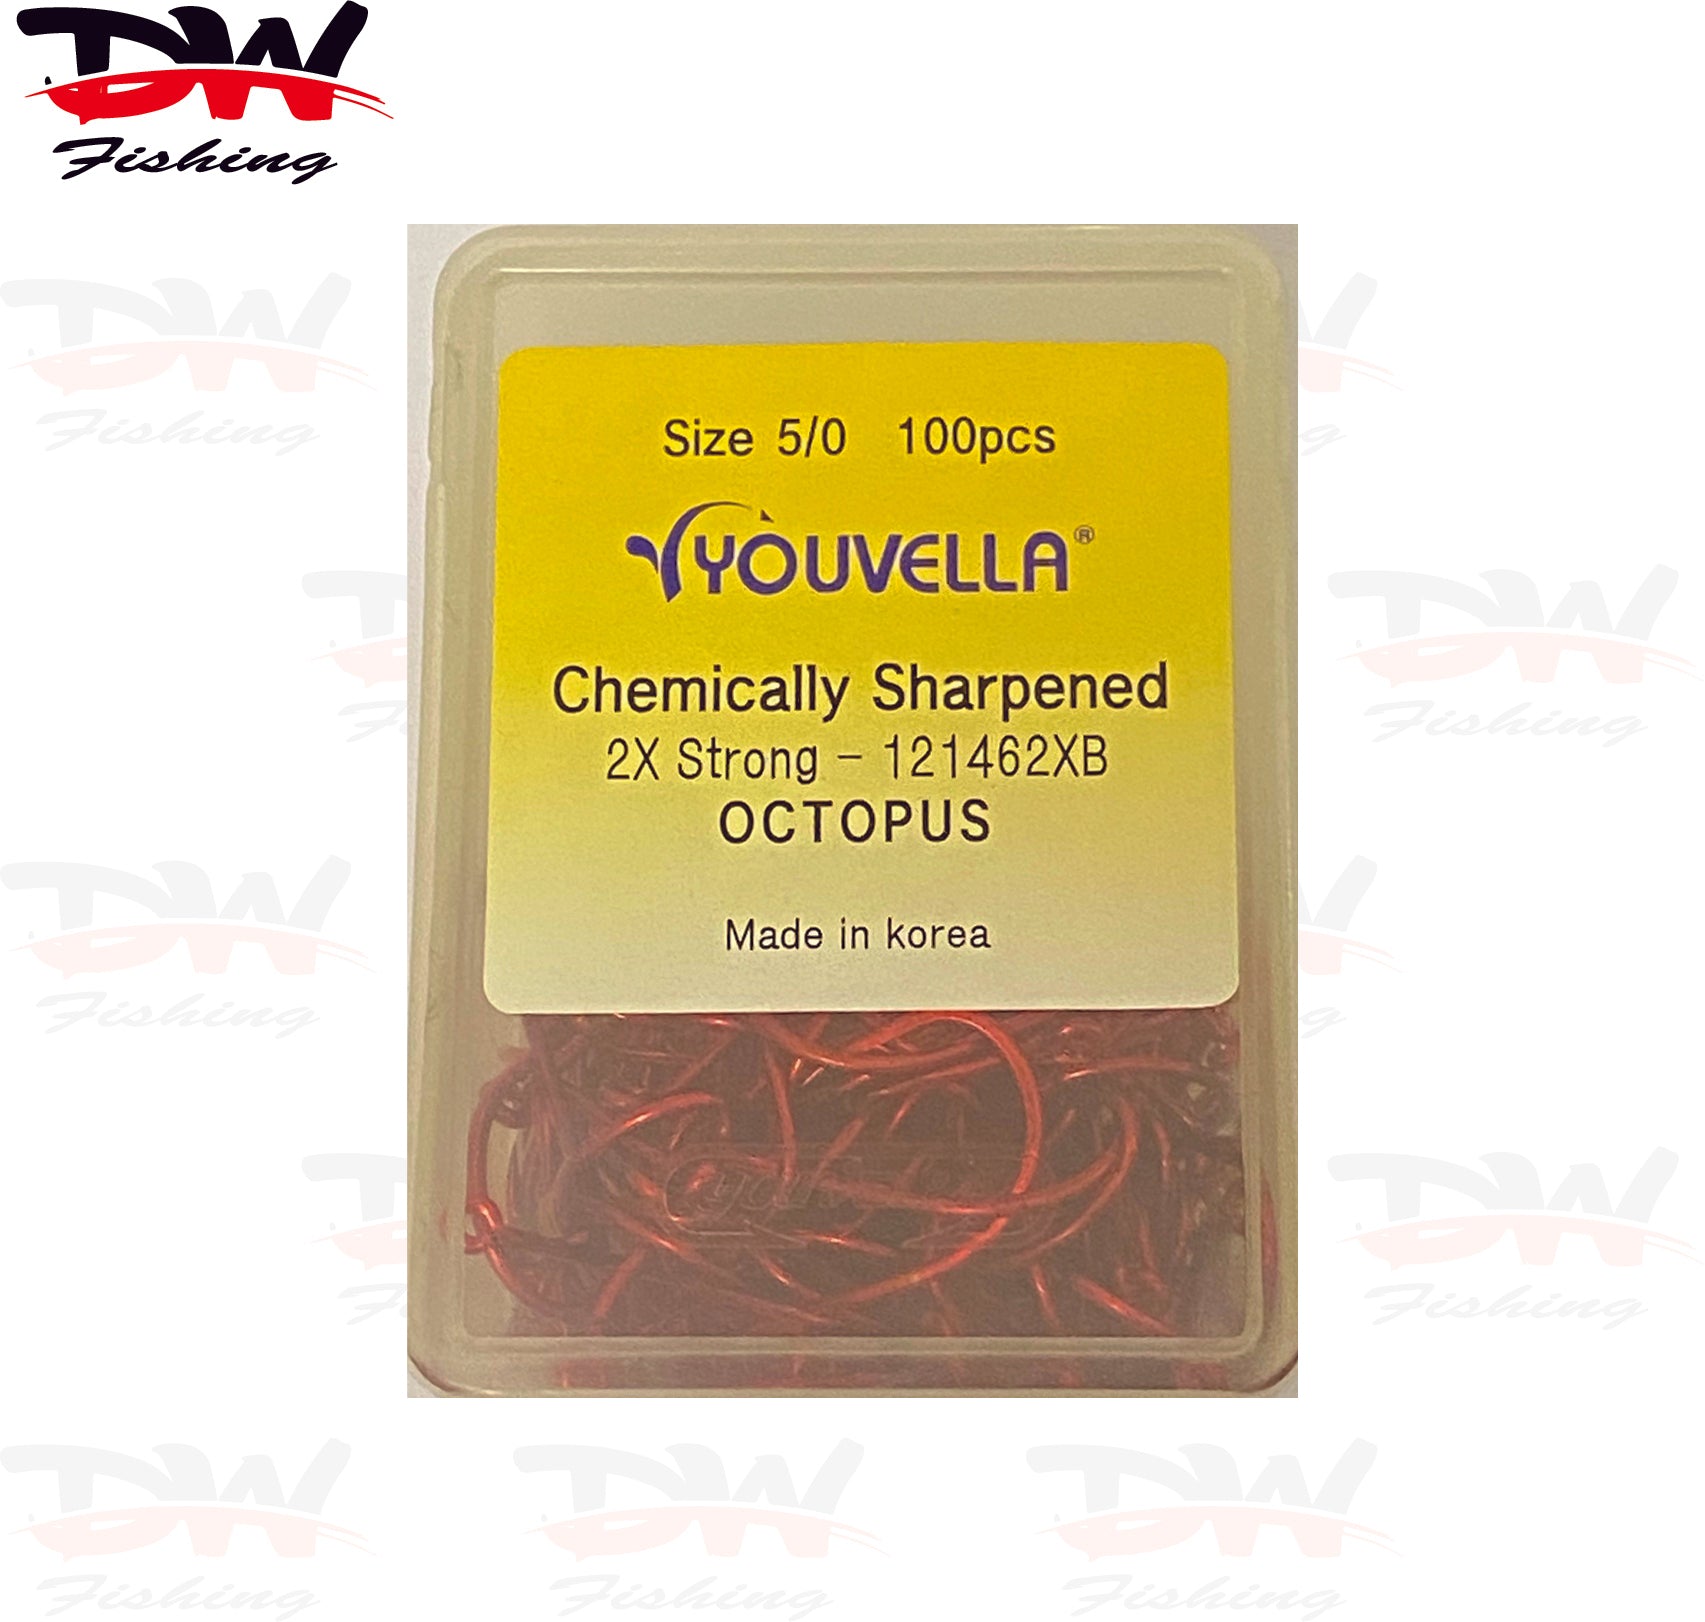 Youvella,  Red Octopus Hook 2 x strong chemically sharpened, Bulk 50 and 100 pack